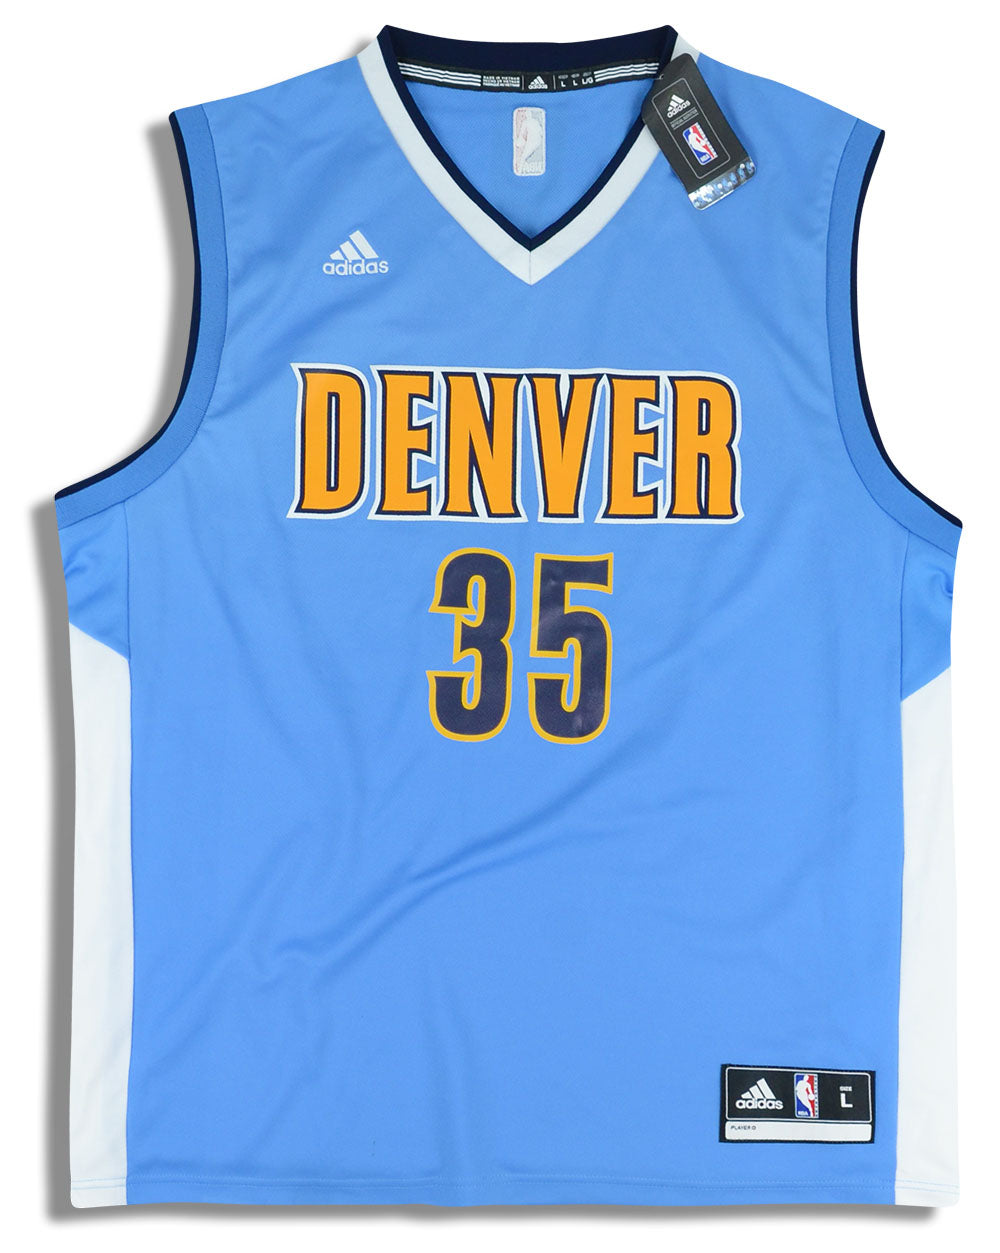 2015-17 DENVER NUGGETS FARIED #35 ADIDAS JERSEY (AWAY) L - W/TAGS